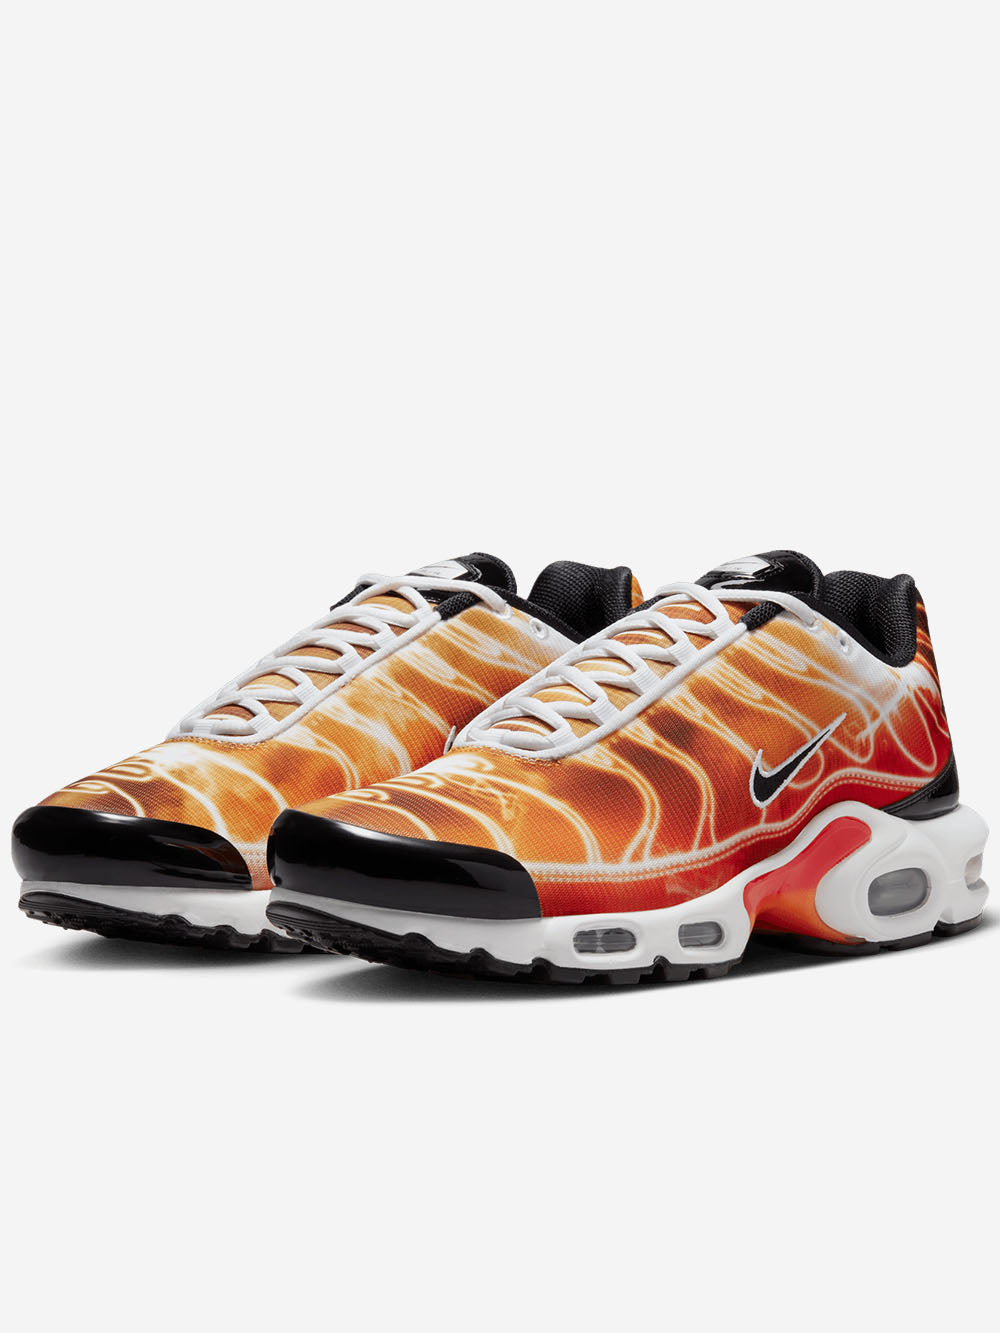 NIKE Air Max Plus OG "Light Photography" Sneakers Rosso Urbanstaroma